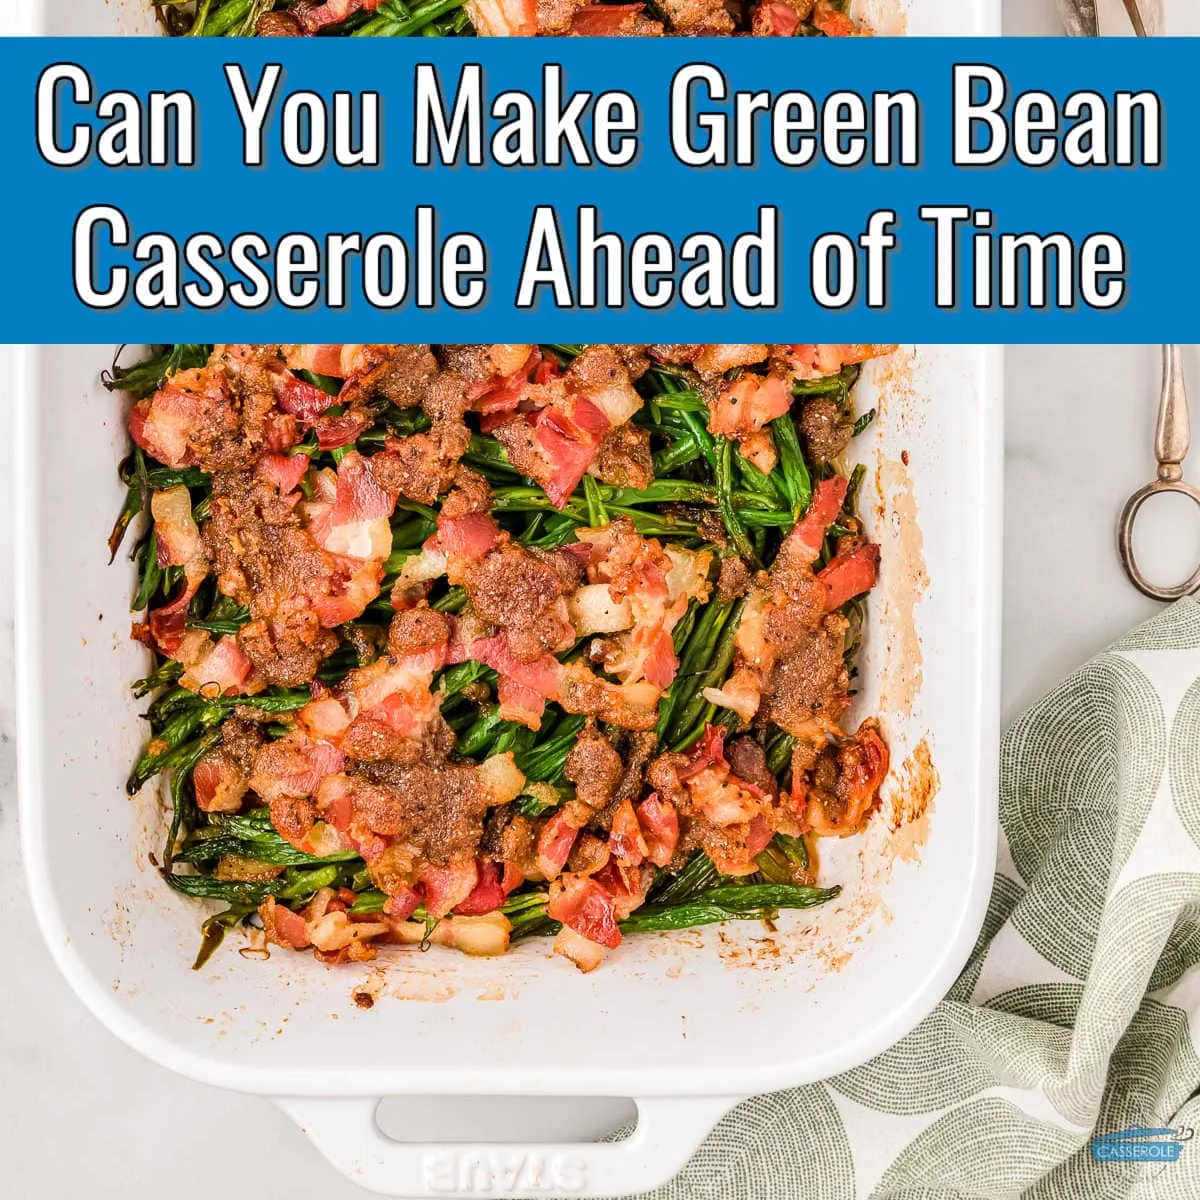 green bean casserole with blue banner and text